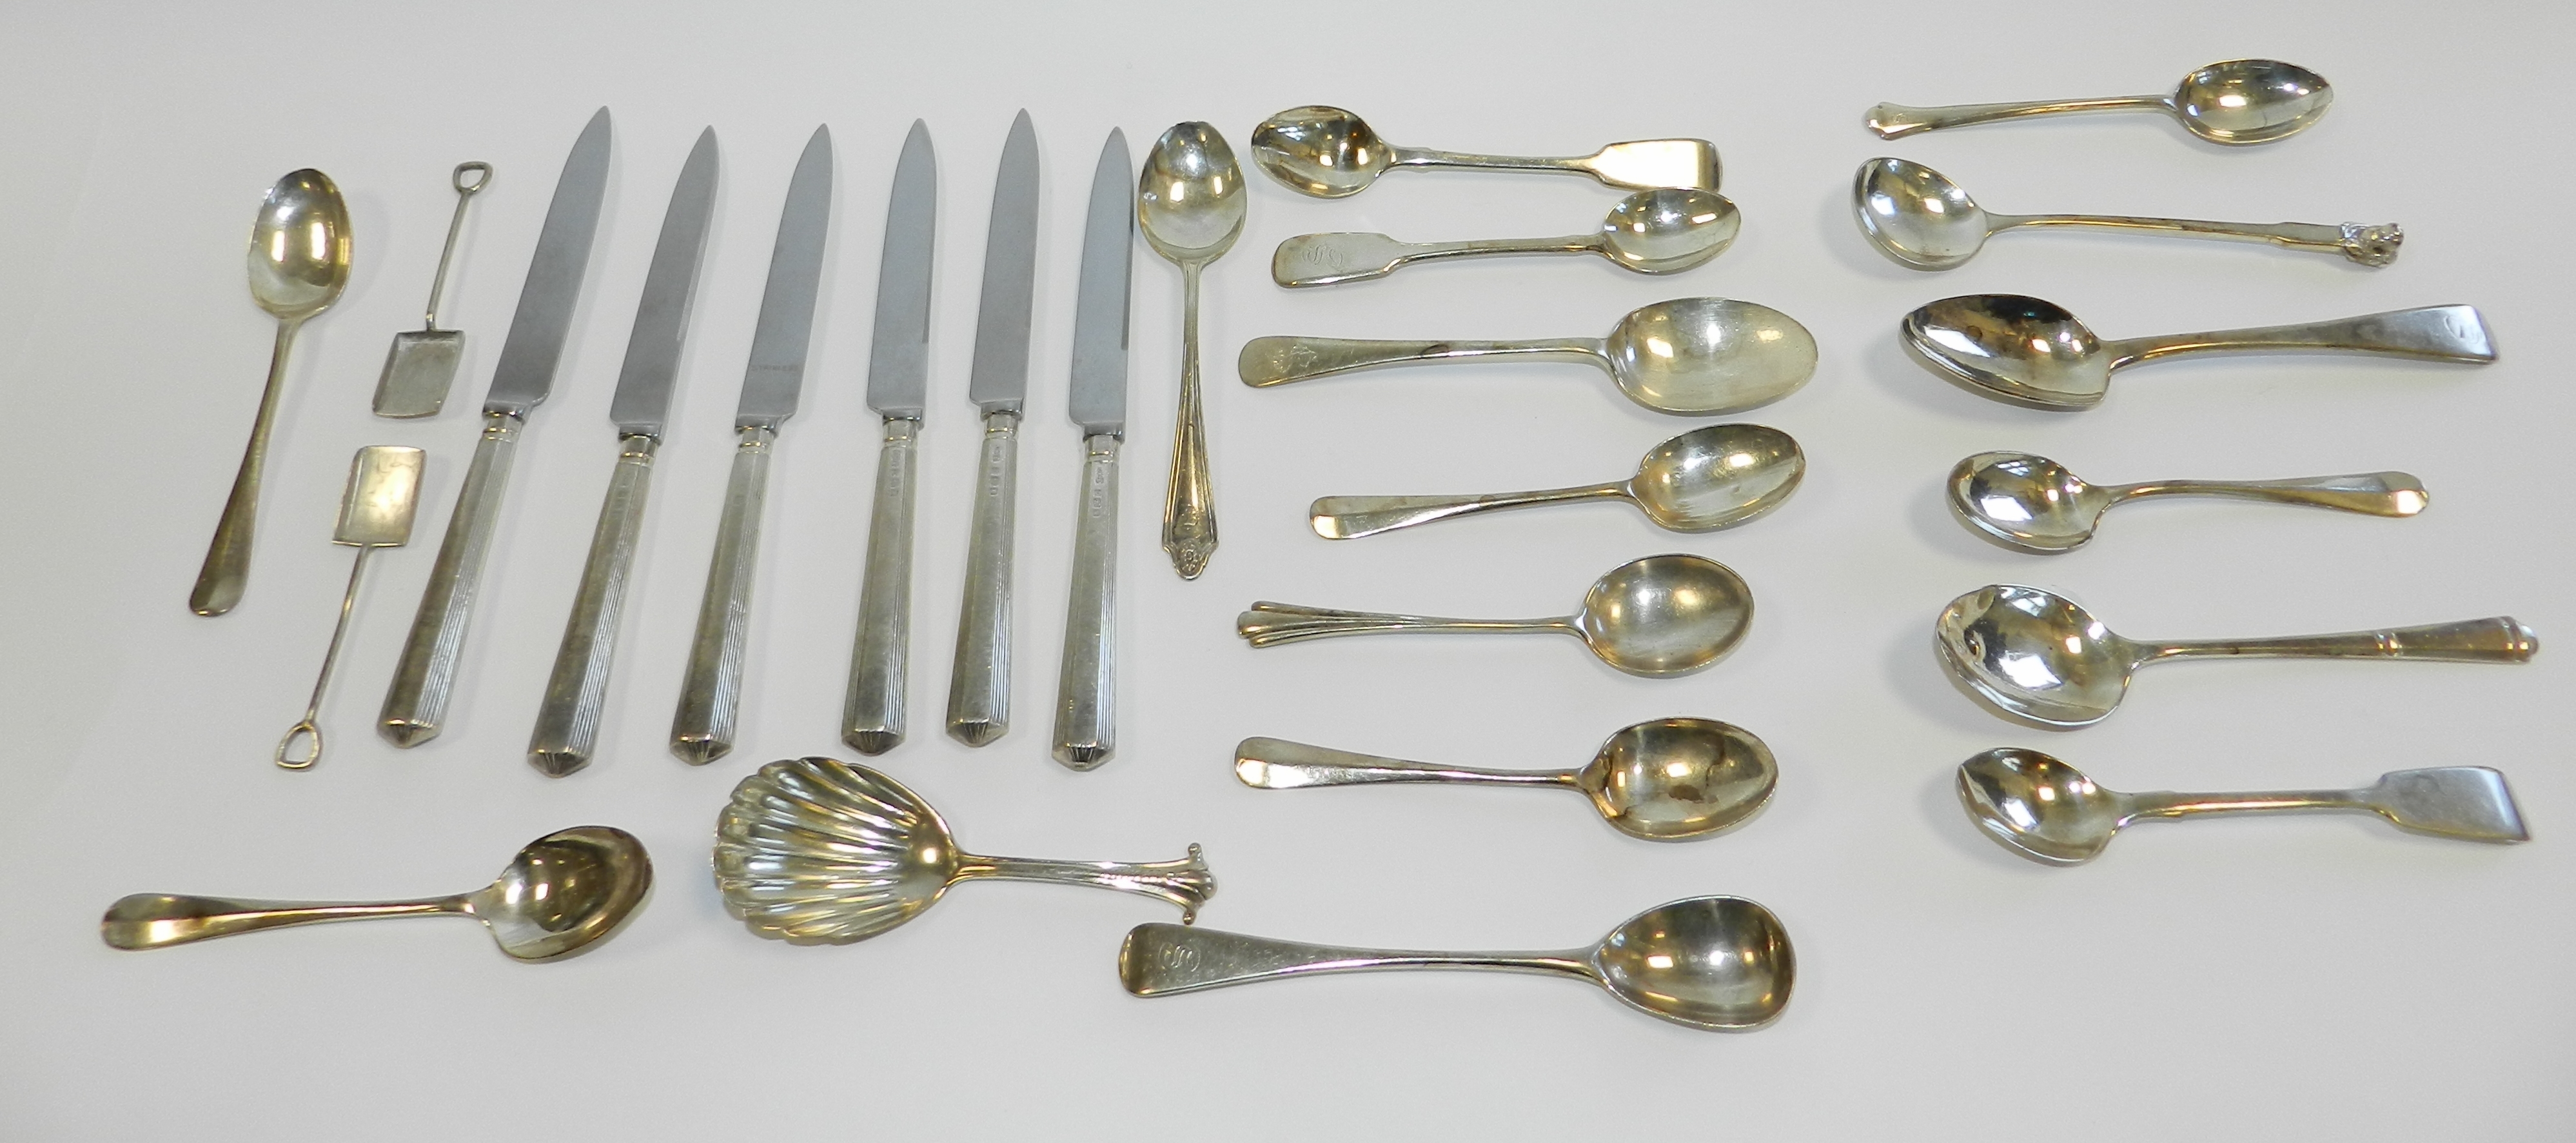 Six silver handled side knives together with a collection of various silver spoons and two silver